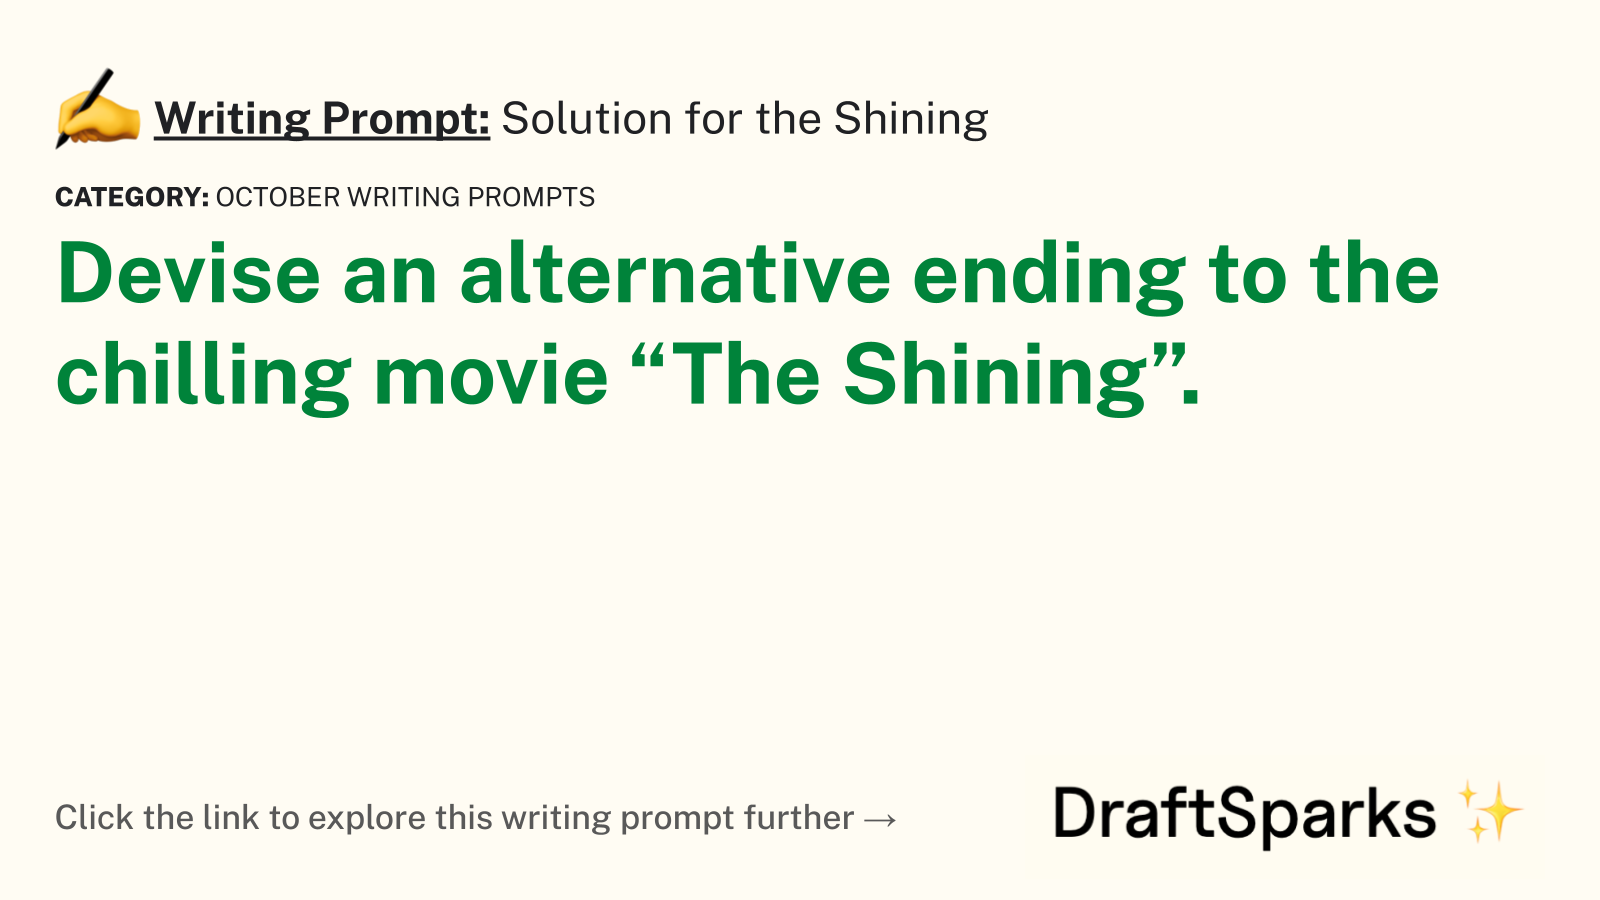 Solution for the Shining